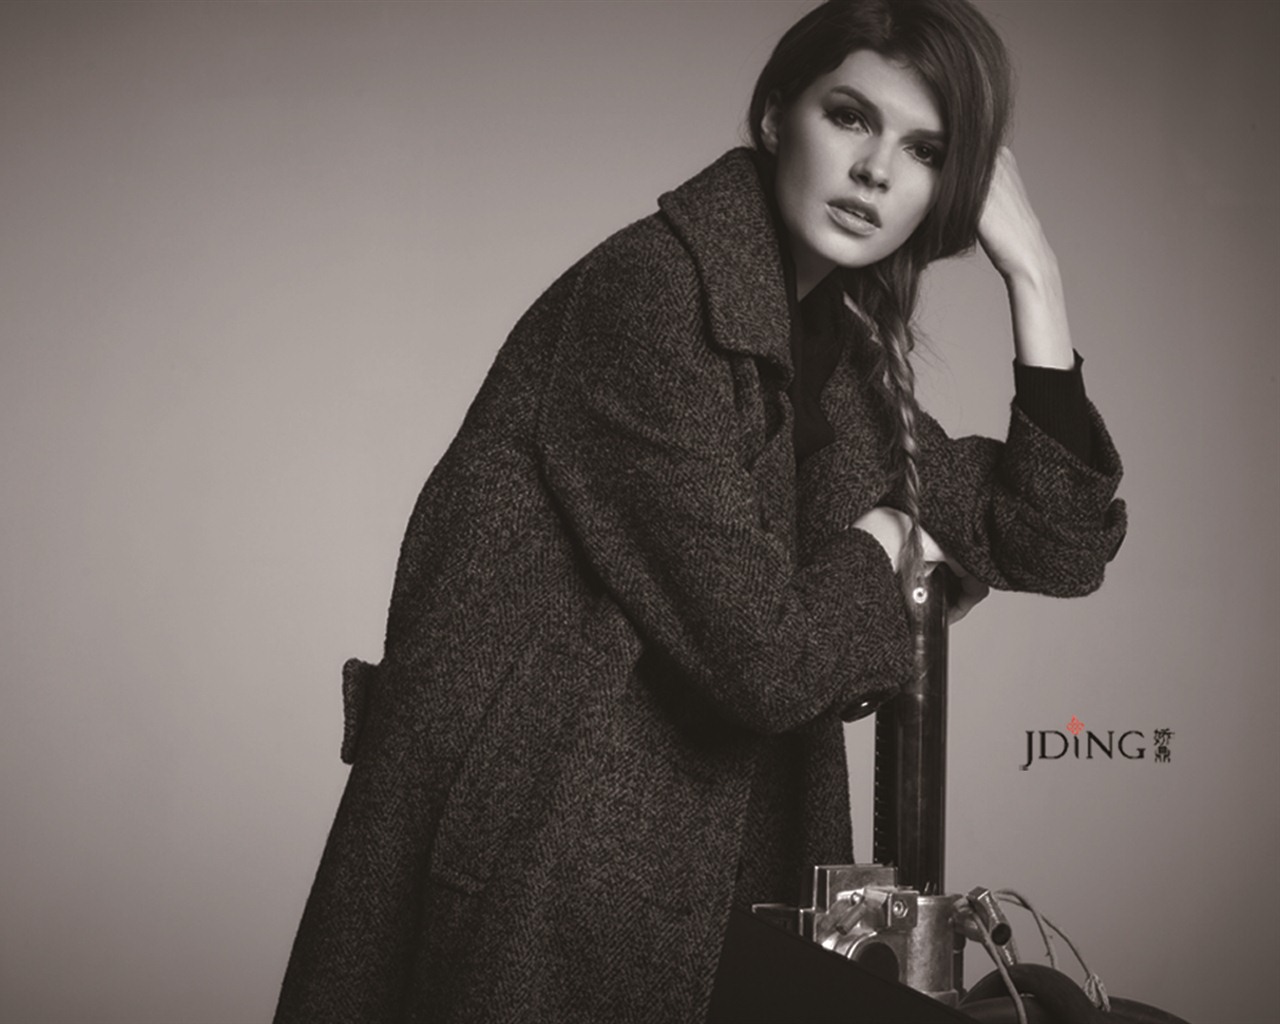 JDING clothing brands HD wallpapers #25 - 1280x1024